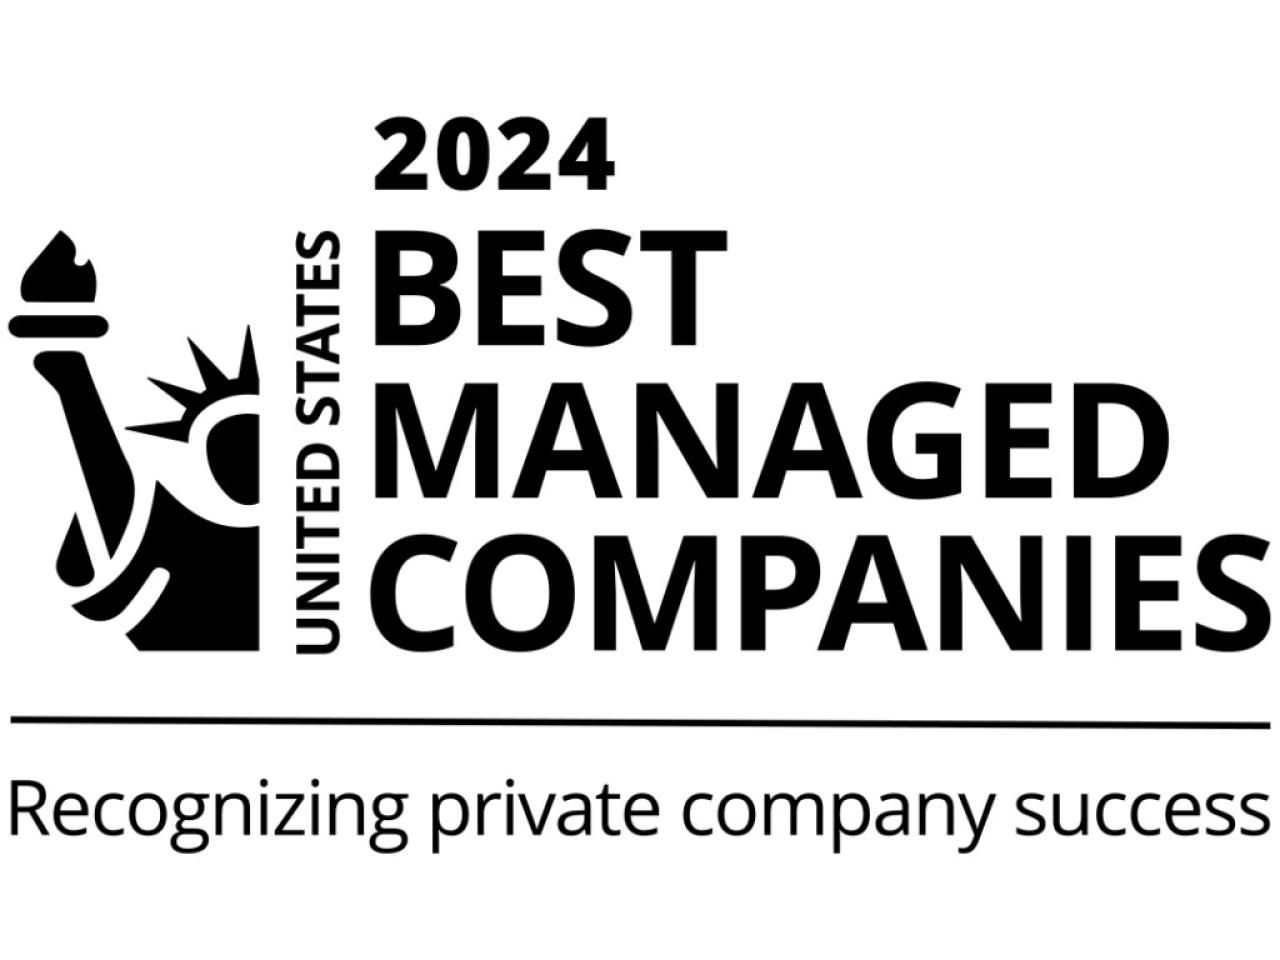 "2024 United States Best Managed Companies. Recognizing private company success" badge.